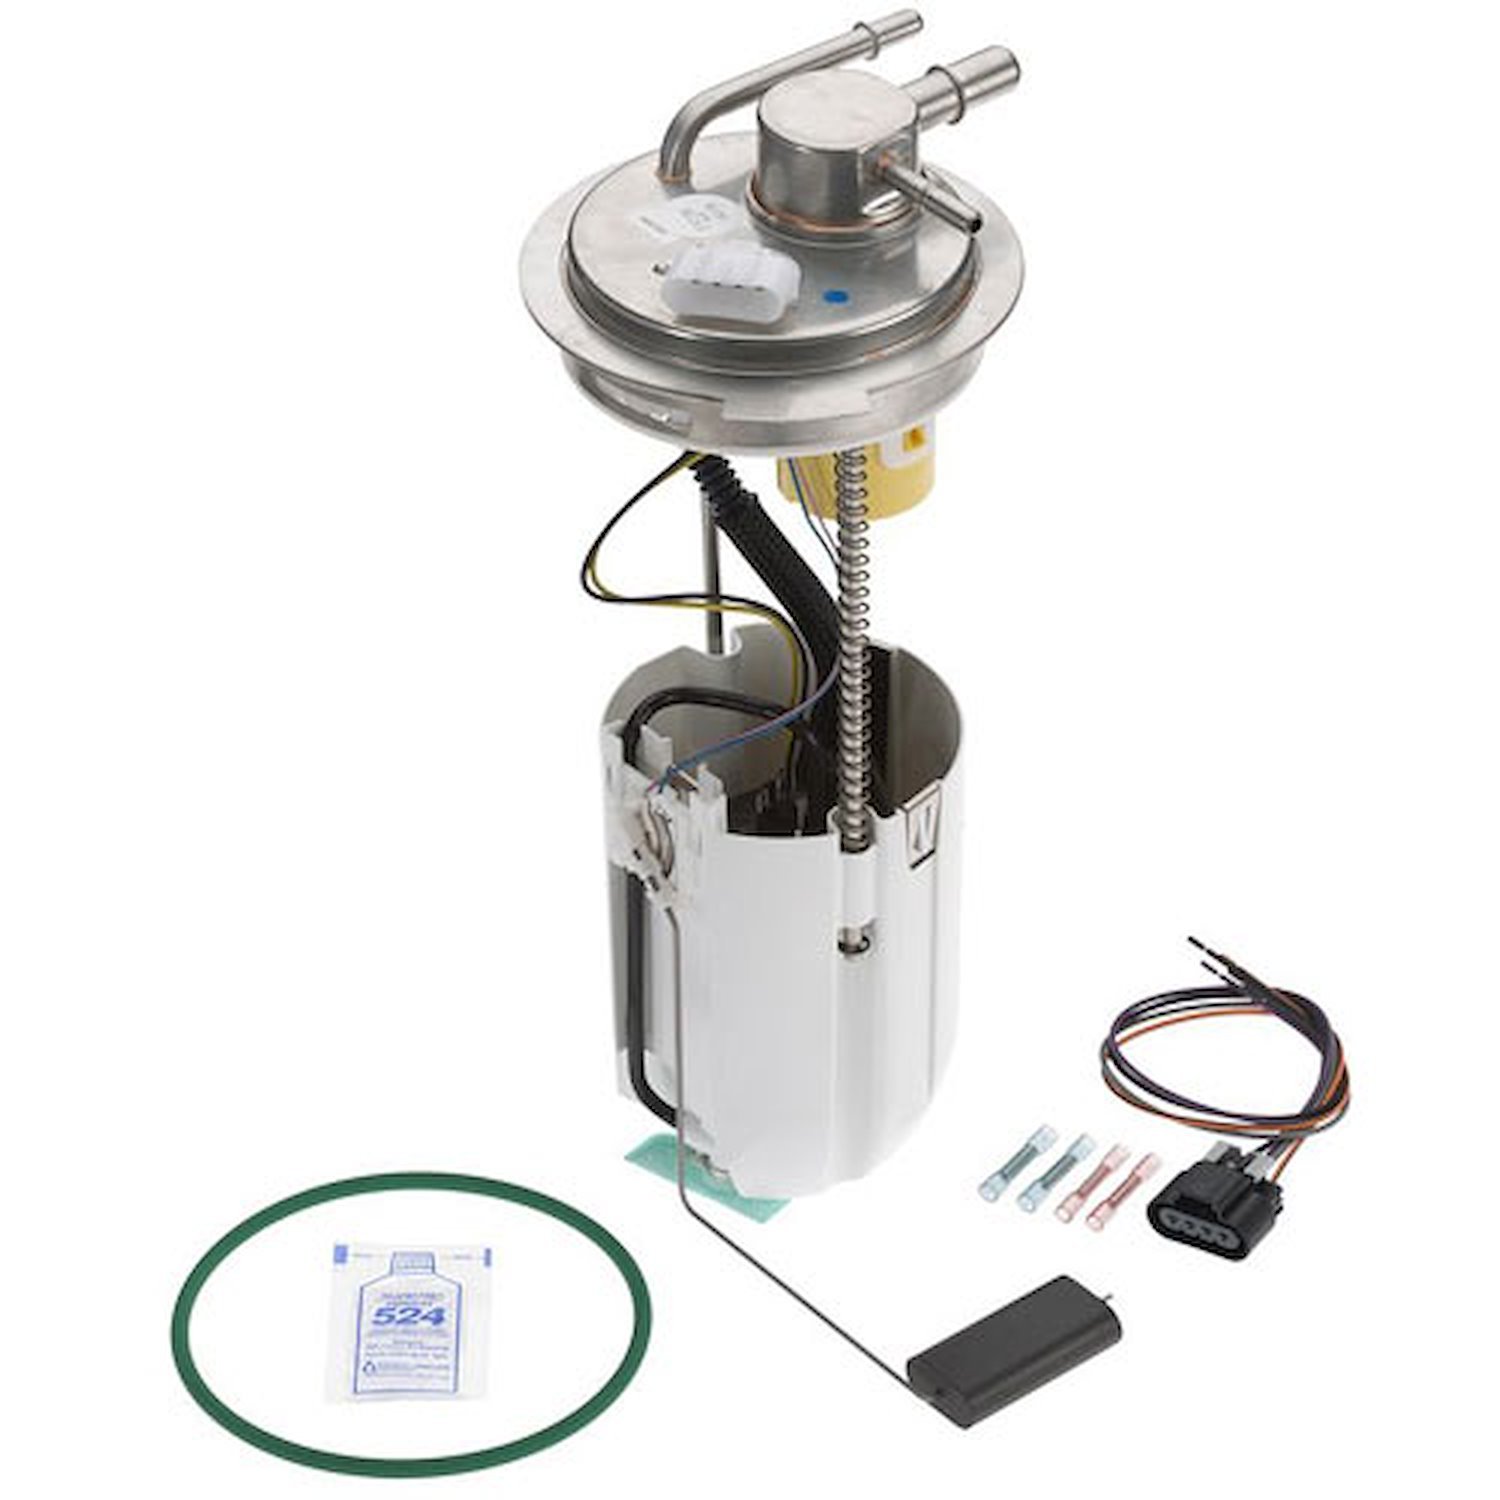 OE GM Replacement Electric Fuel Pump Module Assembly 2004-07 Chevy Silverado 2500HD 6.0L/8.1L